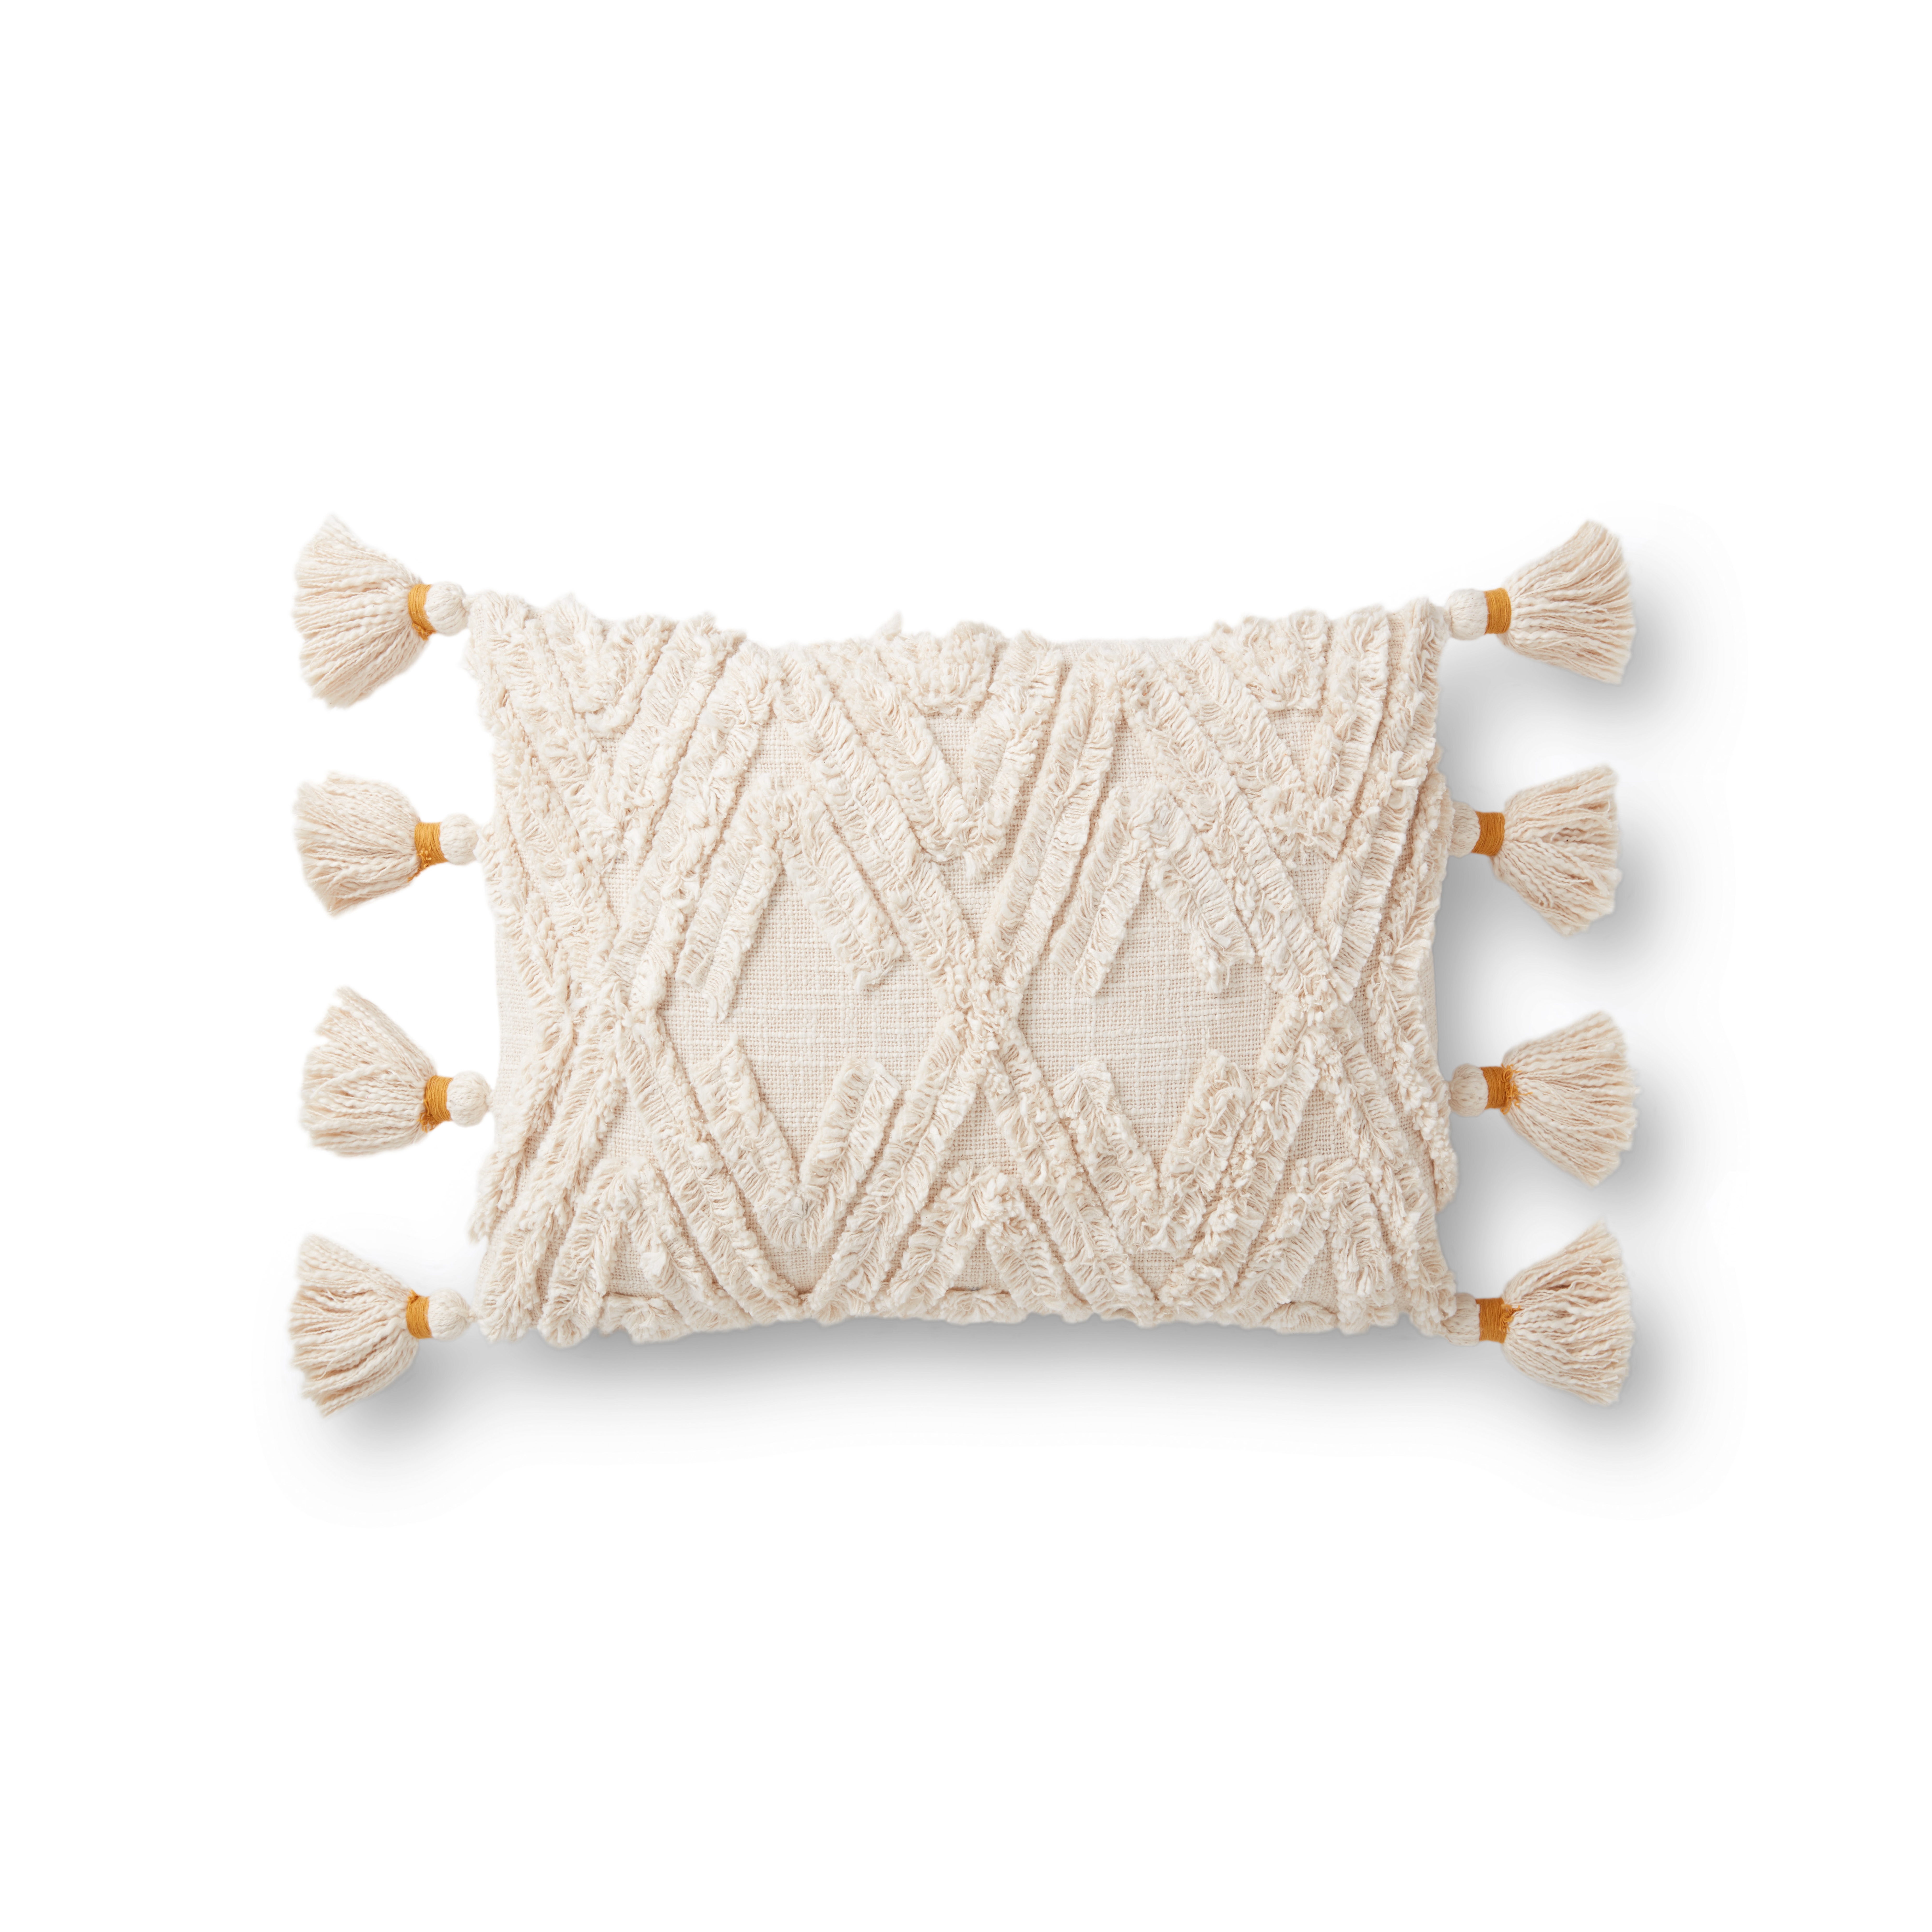 PILLOWS PMH0008 CREAM / GOLD 13" x 21" Cover w/Poly - Magnolia Home by Joana Gaines Crafted by Loloi Rugs